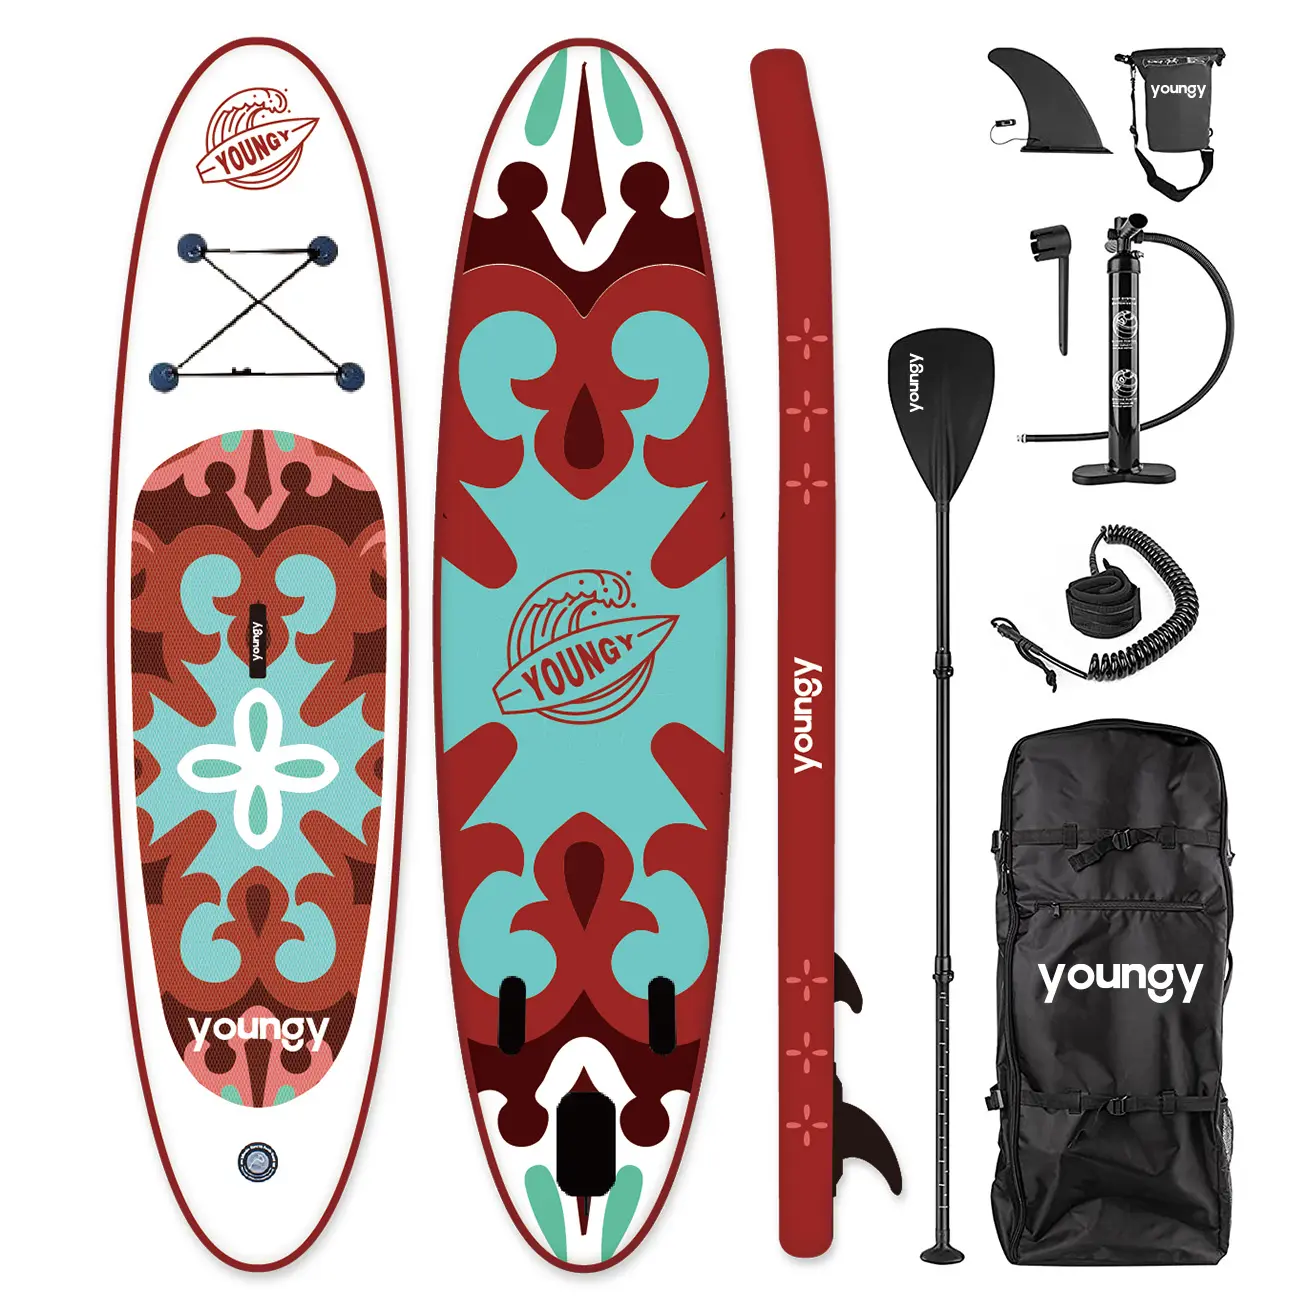 Fanatic model nice shape sup board race for stand up paddleboards supboard for selling